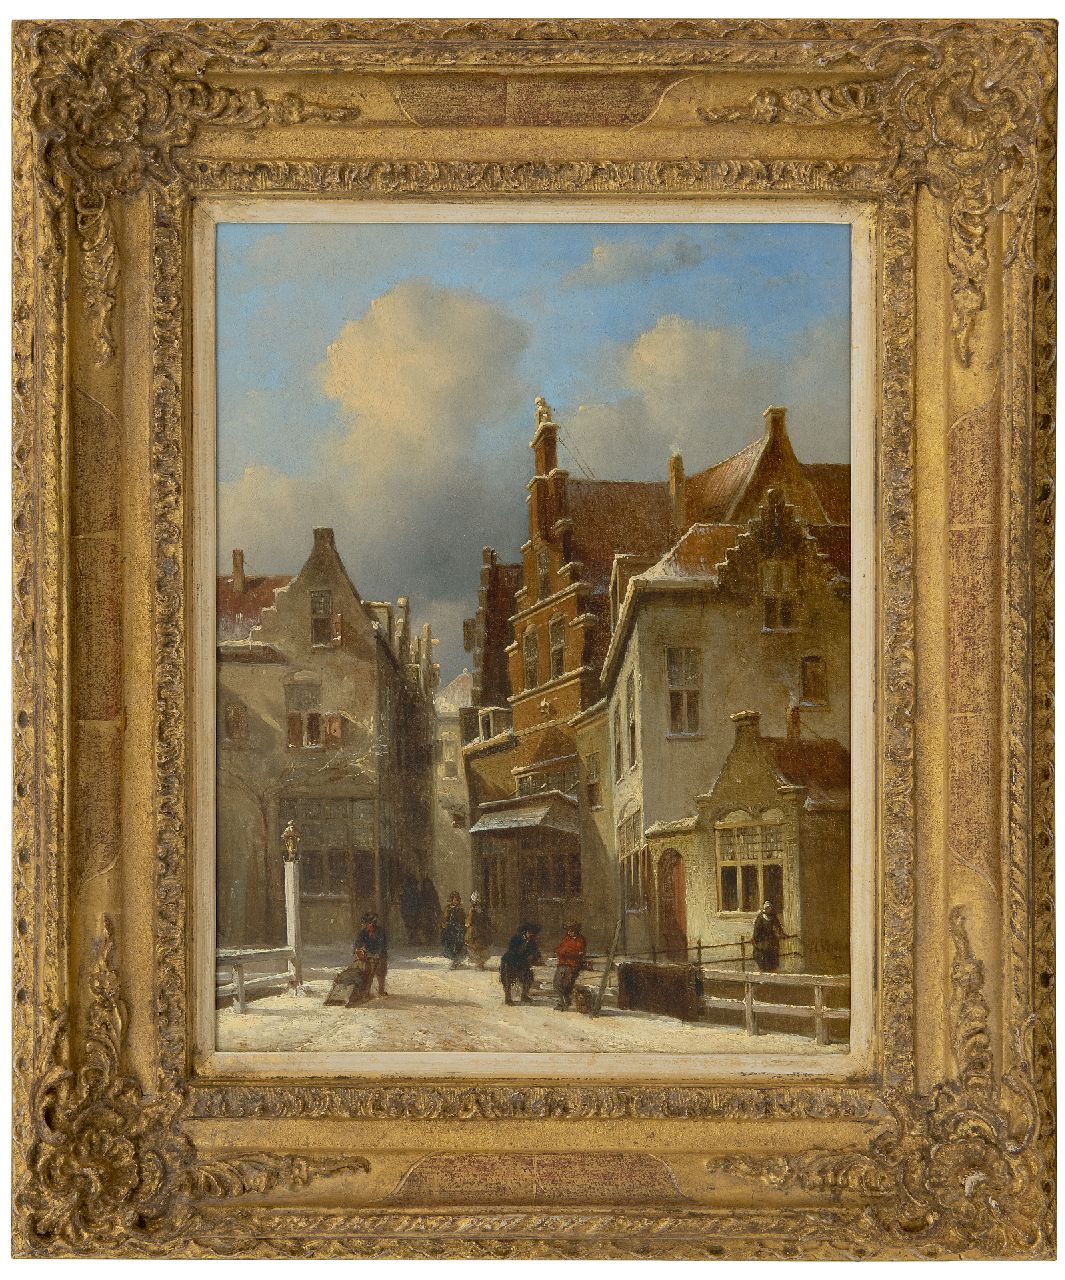 Vertin P.G.  | Petrus Gerardus Vertin | Paintings offered for sale | Snowy townscape with figures on a bridge, oil on panel 35.0 x 27.1 cm, signed l.r. and dated '43